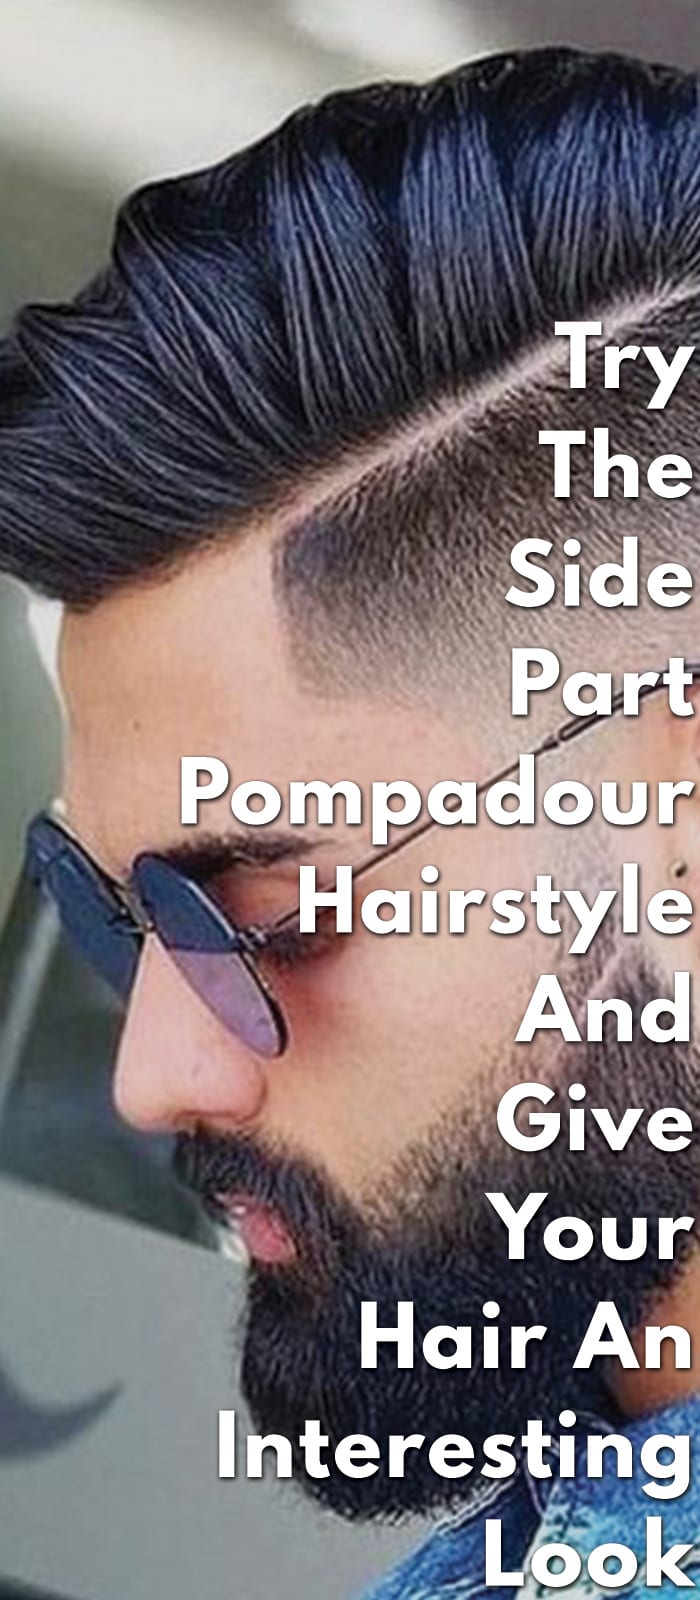 Try The Side Part Pompadour Hairstyle